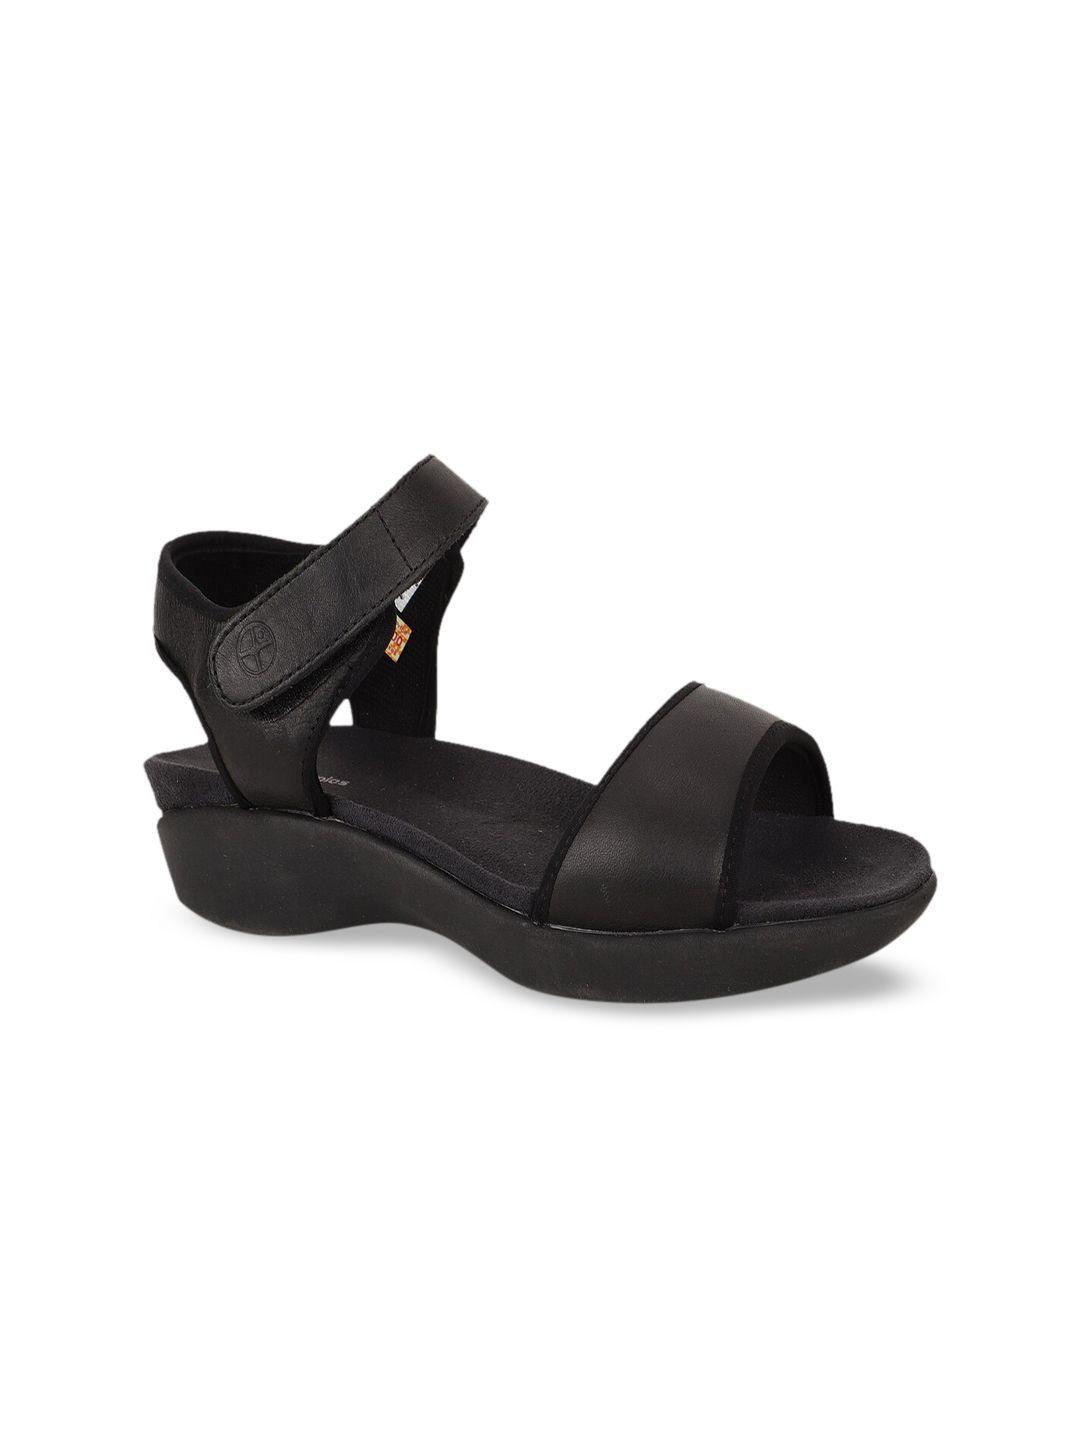 hush puppies black leather wedge sandals